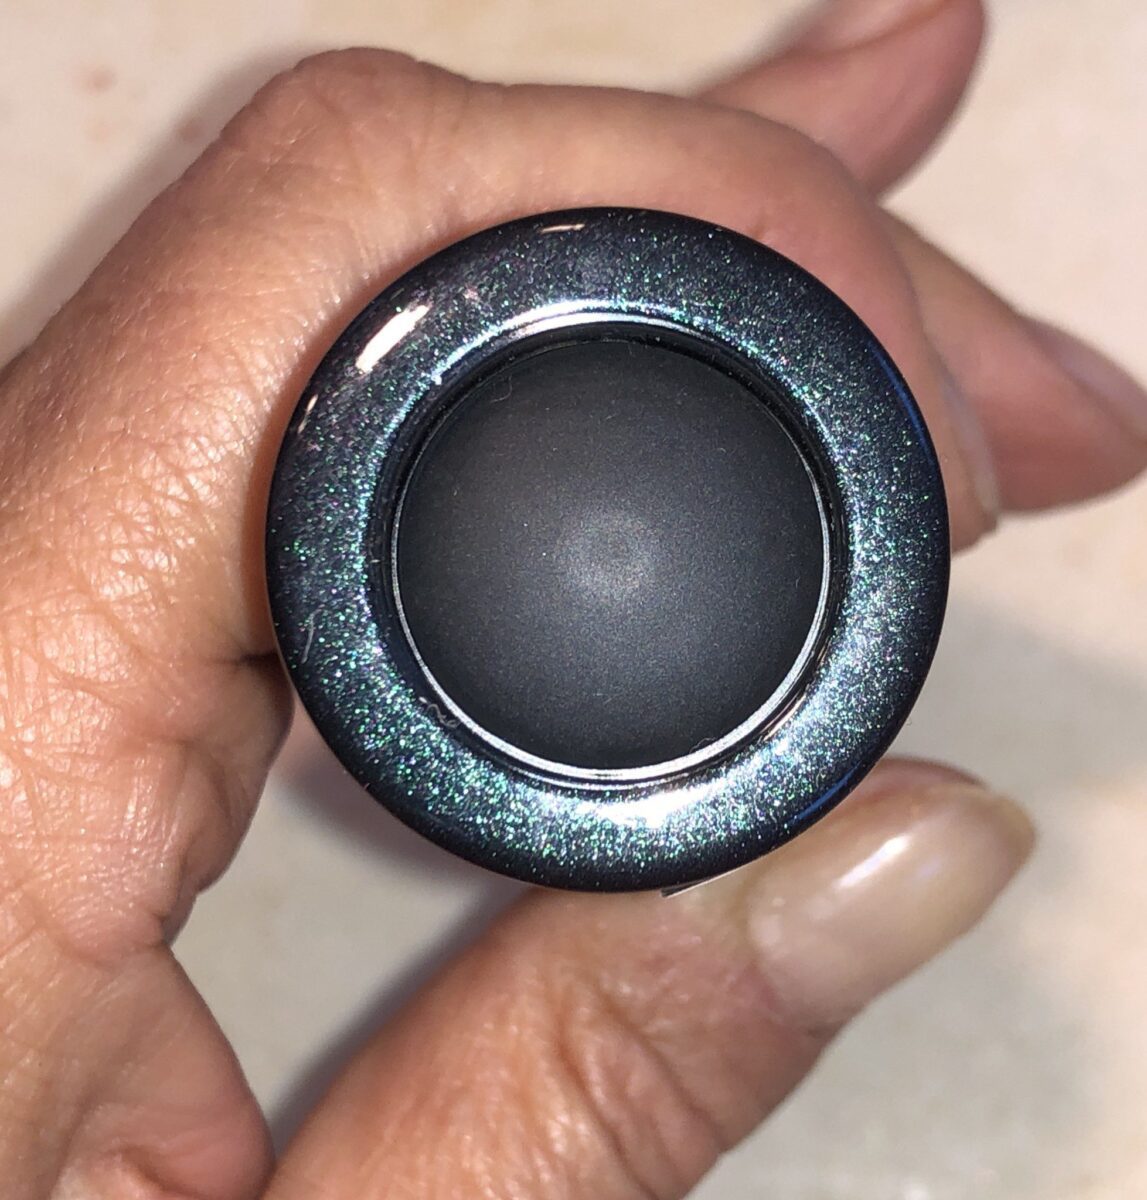 PUSH THE BUTTON ON THE BOTTOM OF THE SURRATT DEW DROP FOUNDATION TO DISPENSE A DROP OF FOUNDATION